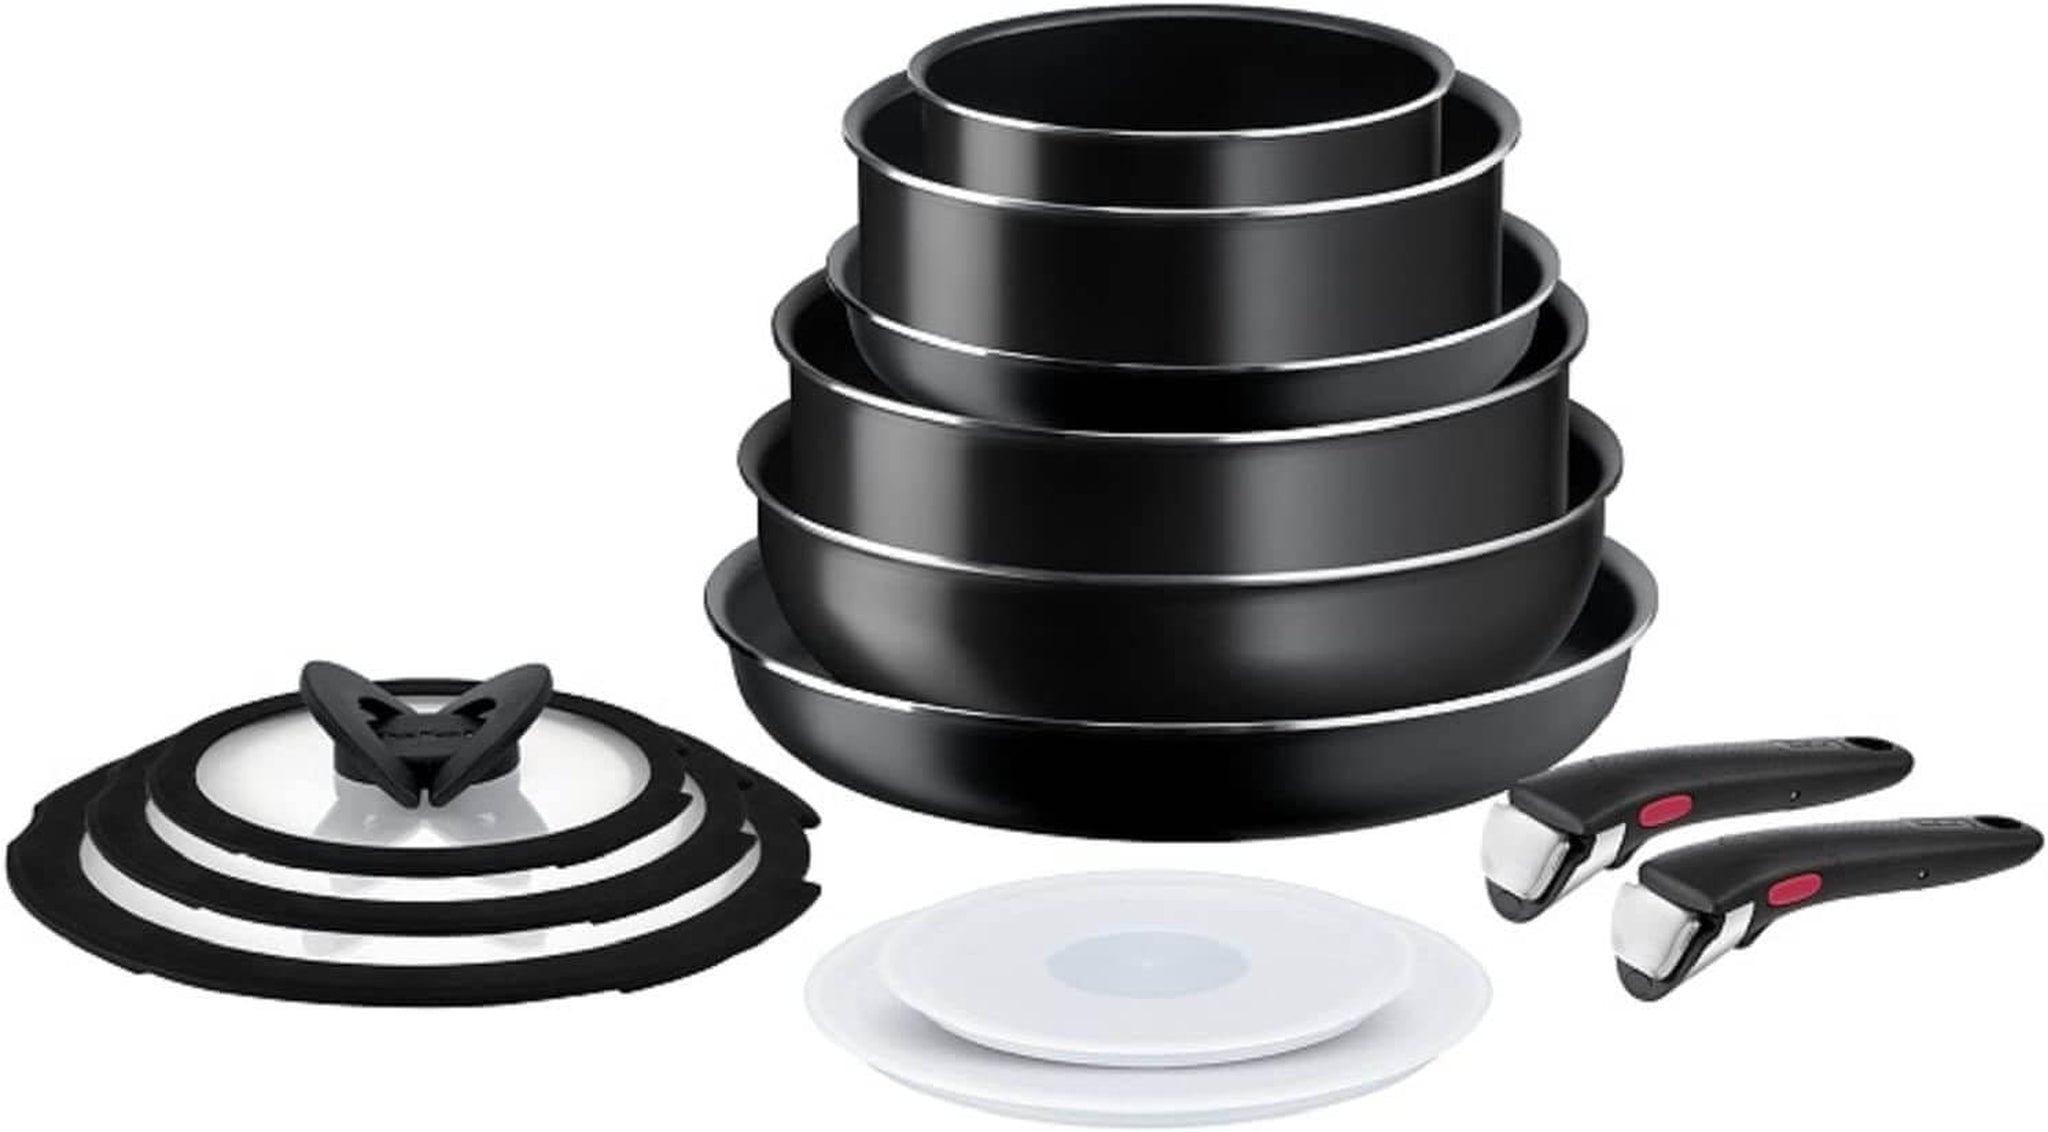 Win a Tefal 13pc Cooking Set